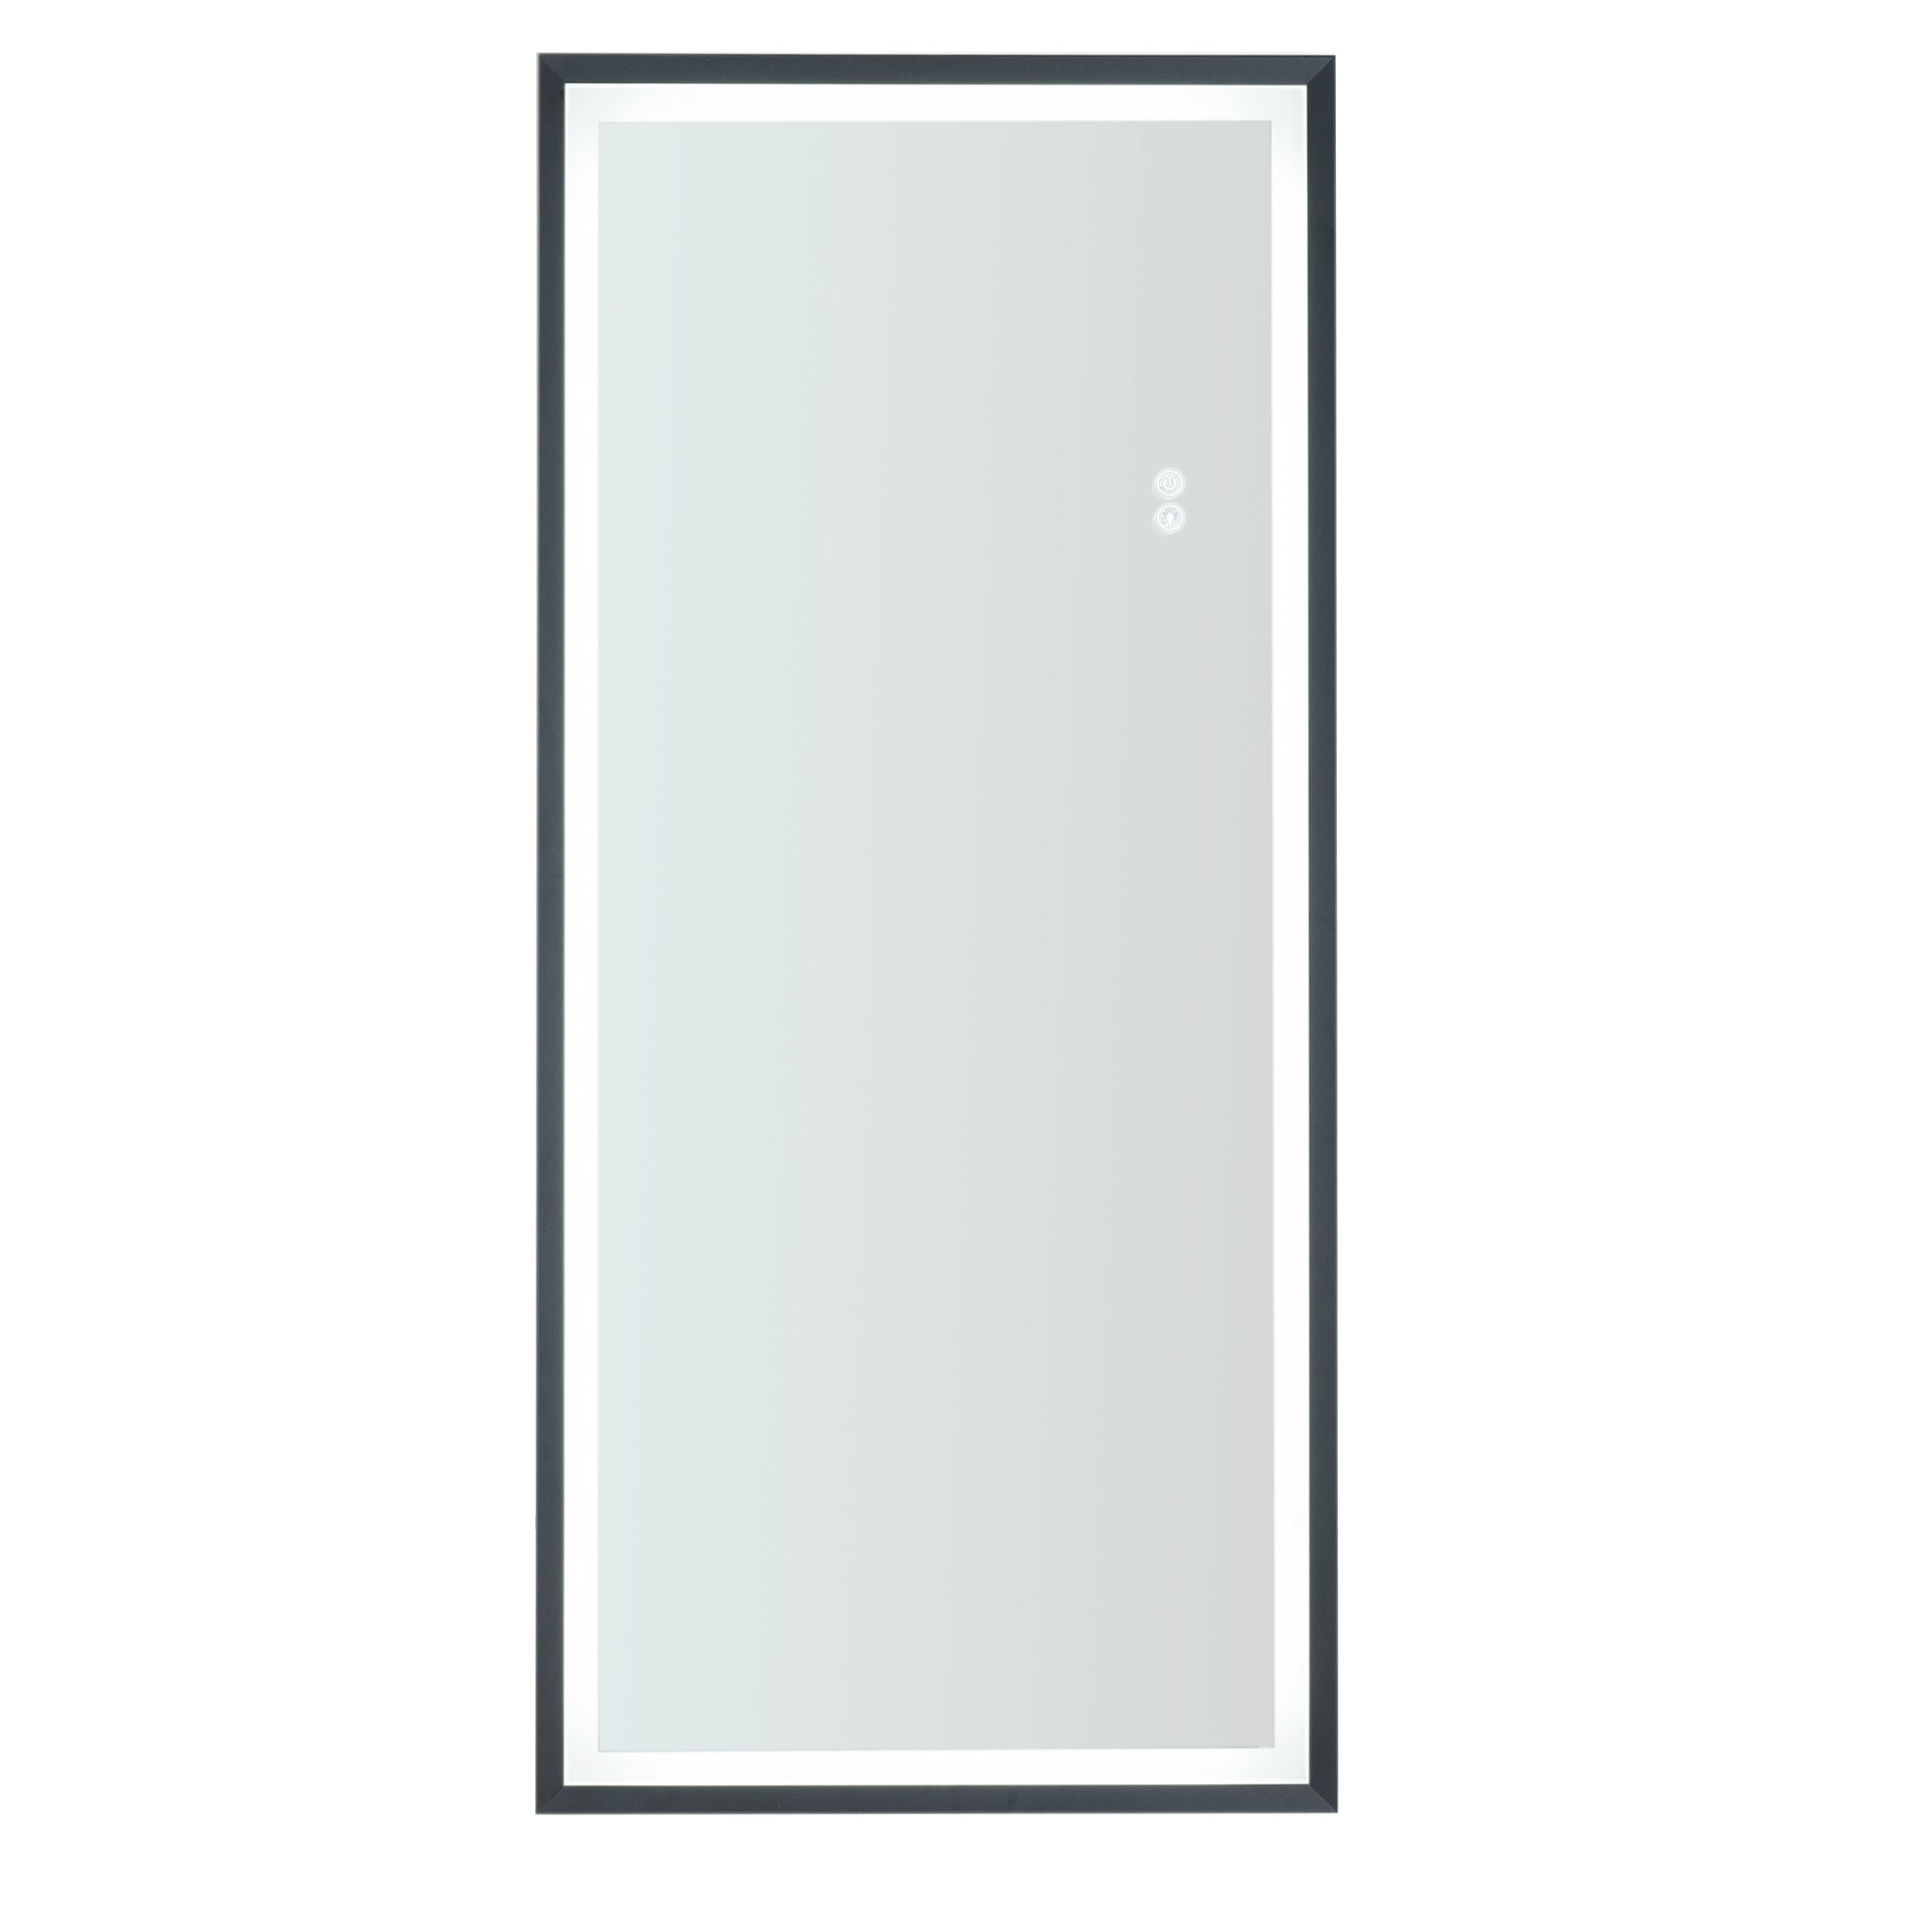 LED Wall Mounted Lighted Floor Mirror with Entry Dimmer Touch Switch-Boyel Living